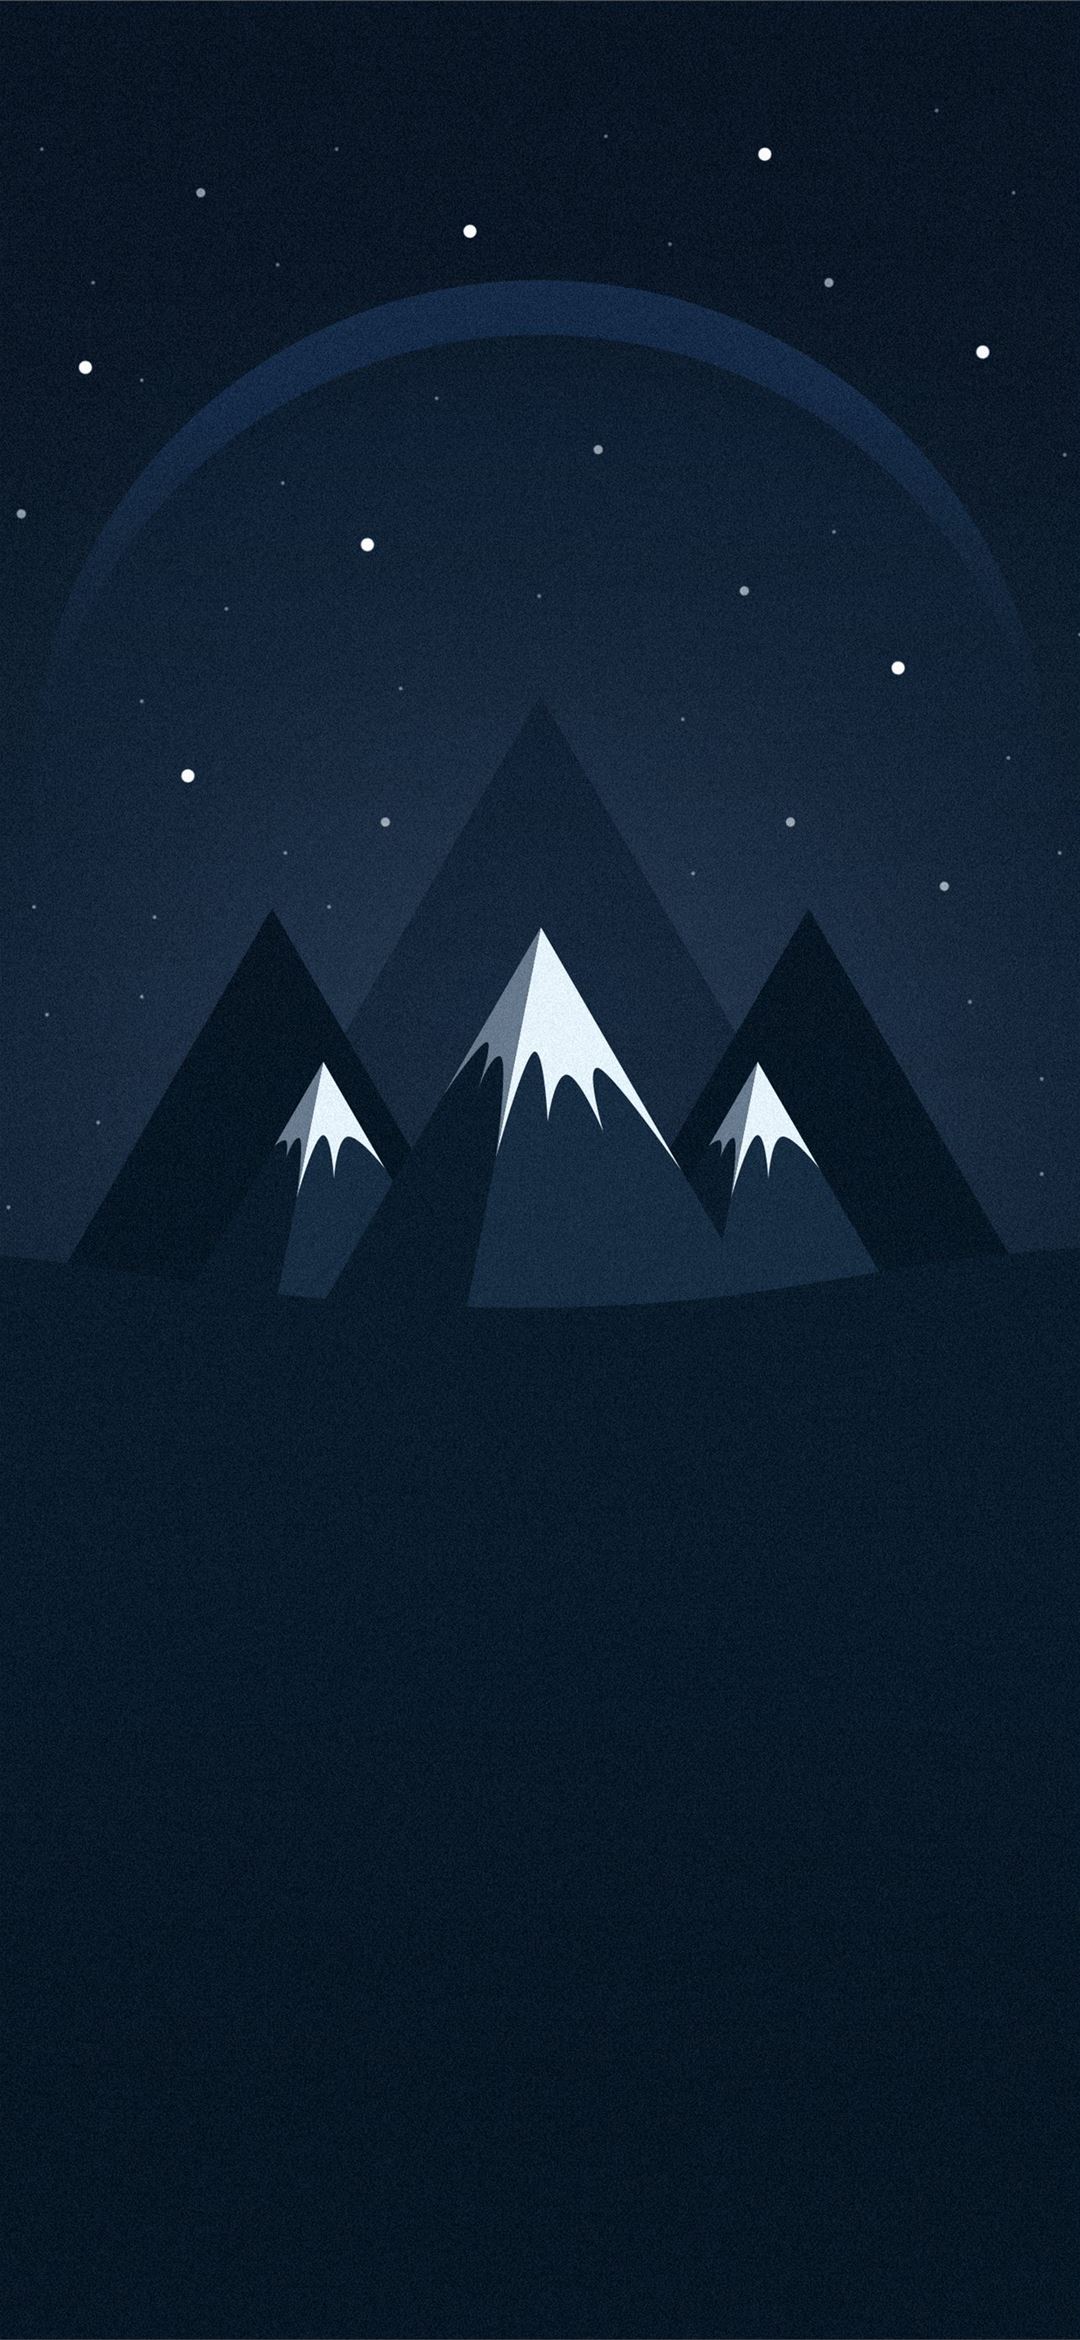 4K For Mobile Minimalist If you have your own one. iPhone Wallpaper Free Download